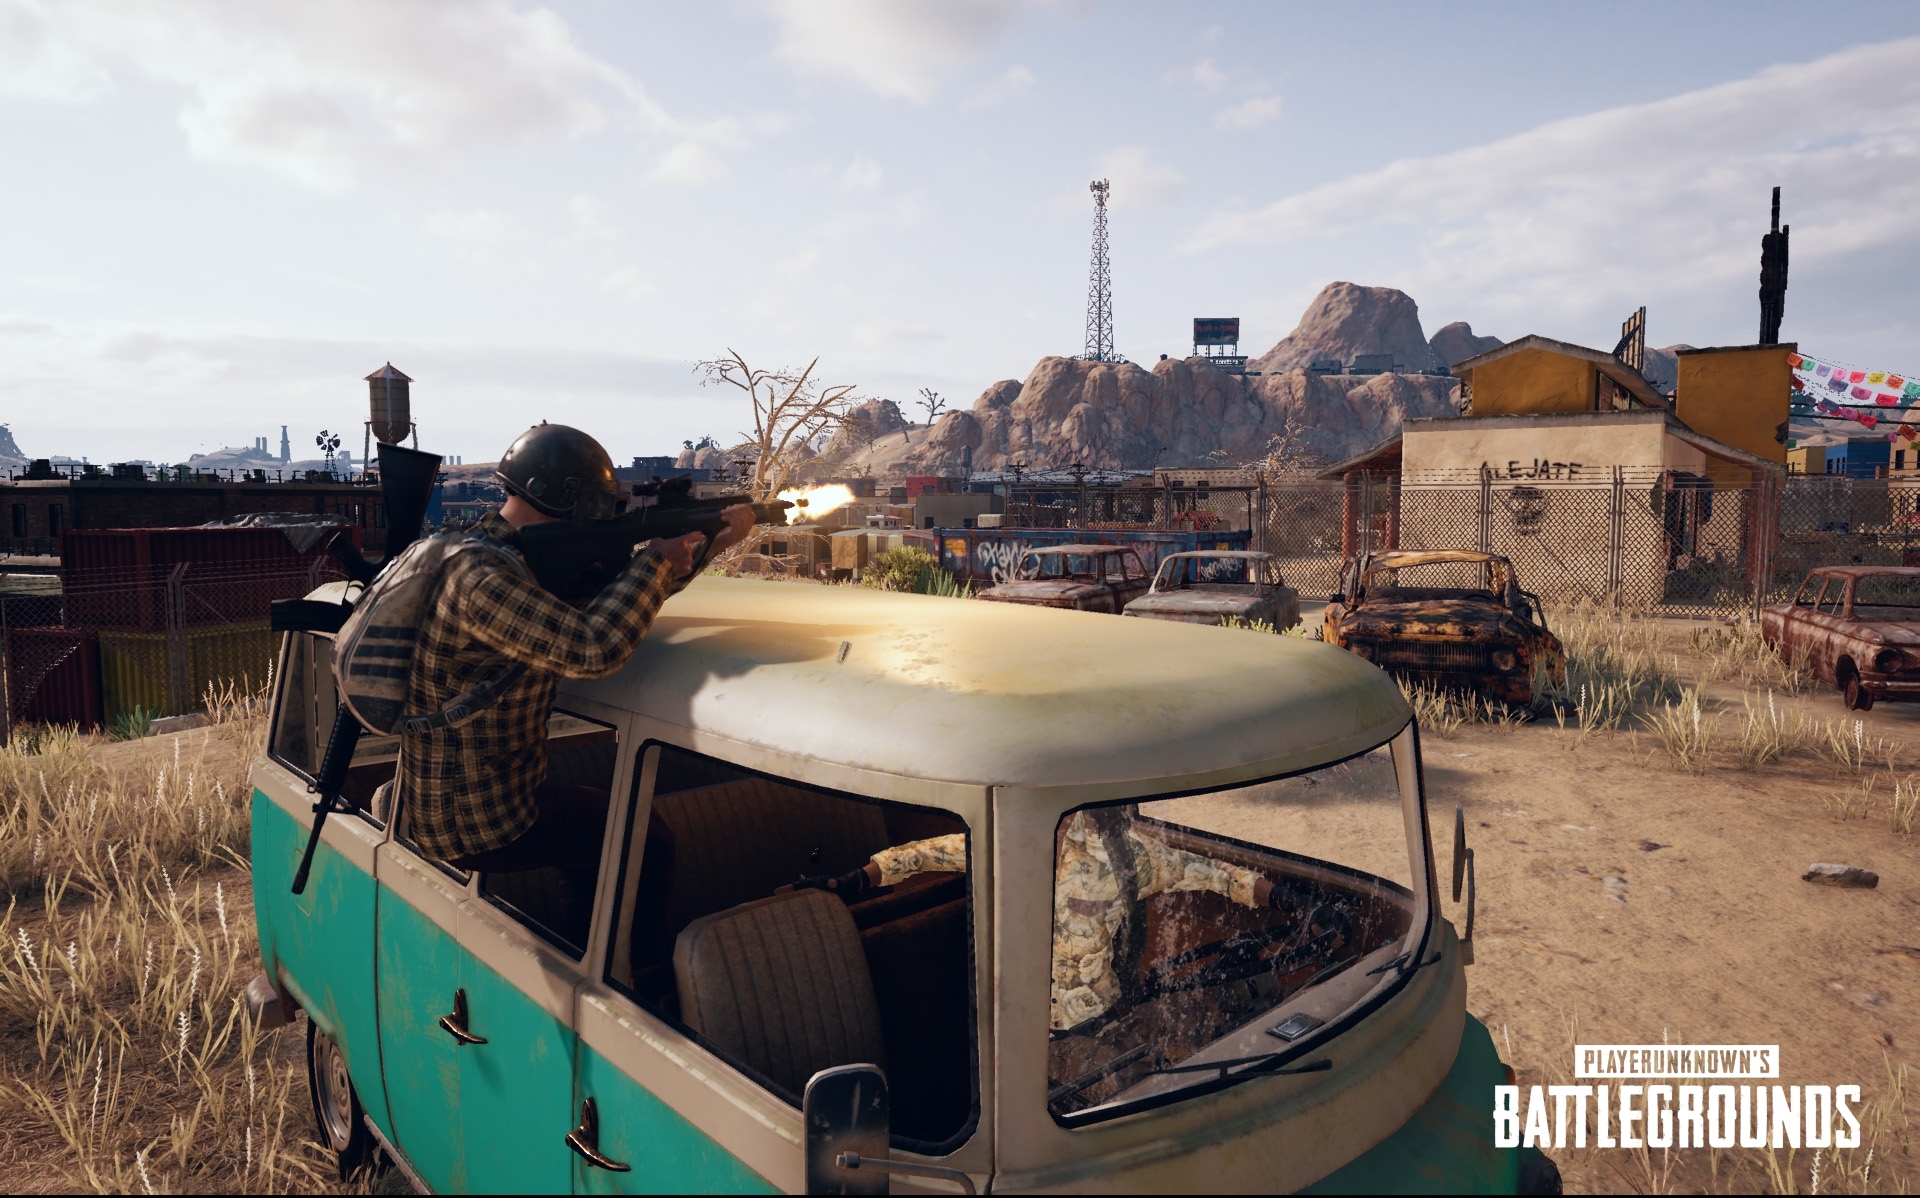 Update Patch Notes Released For PC Version Of PlayerUnknown’s Battlegrounds (PUBG)